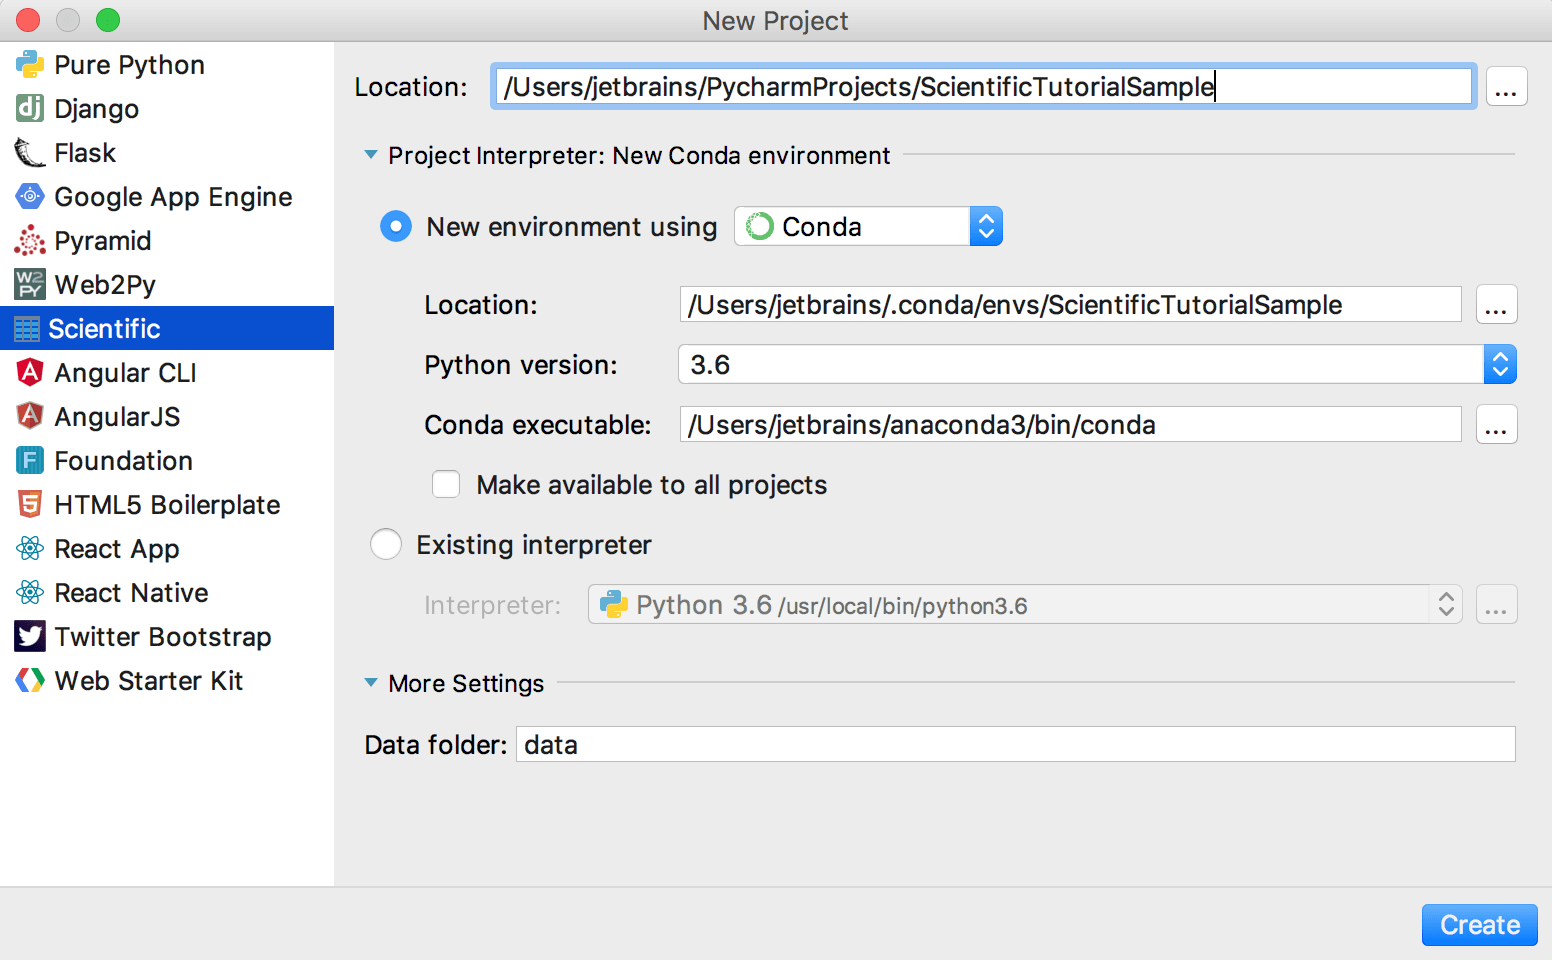 creating a new scientific project in PyCharm